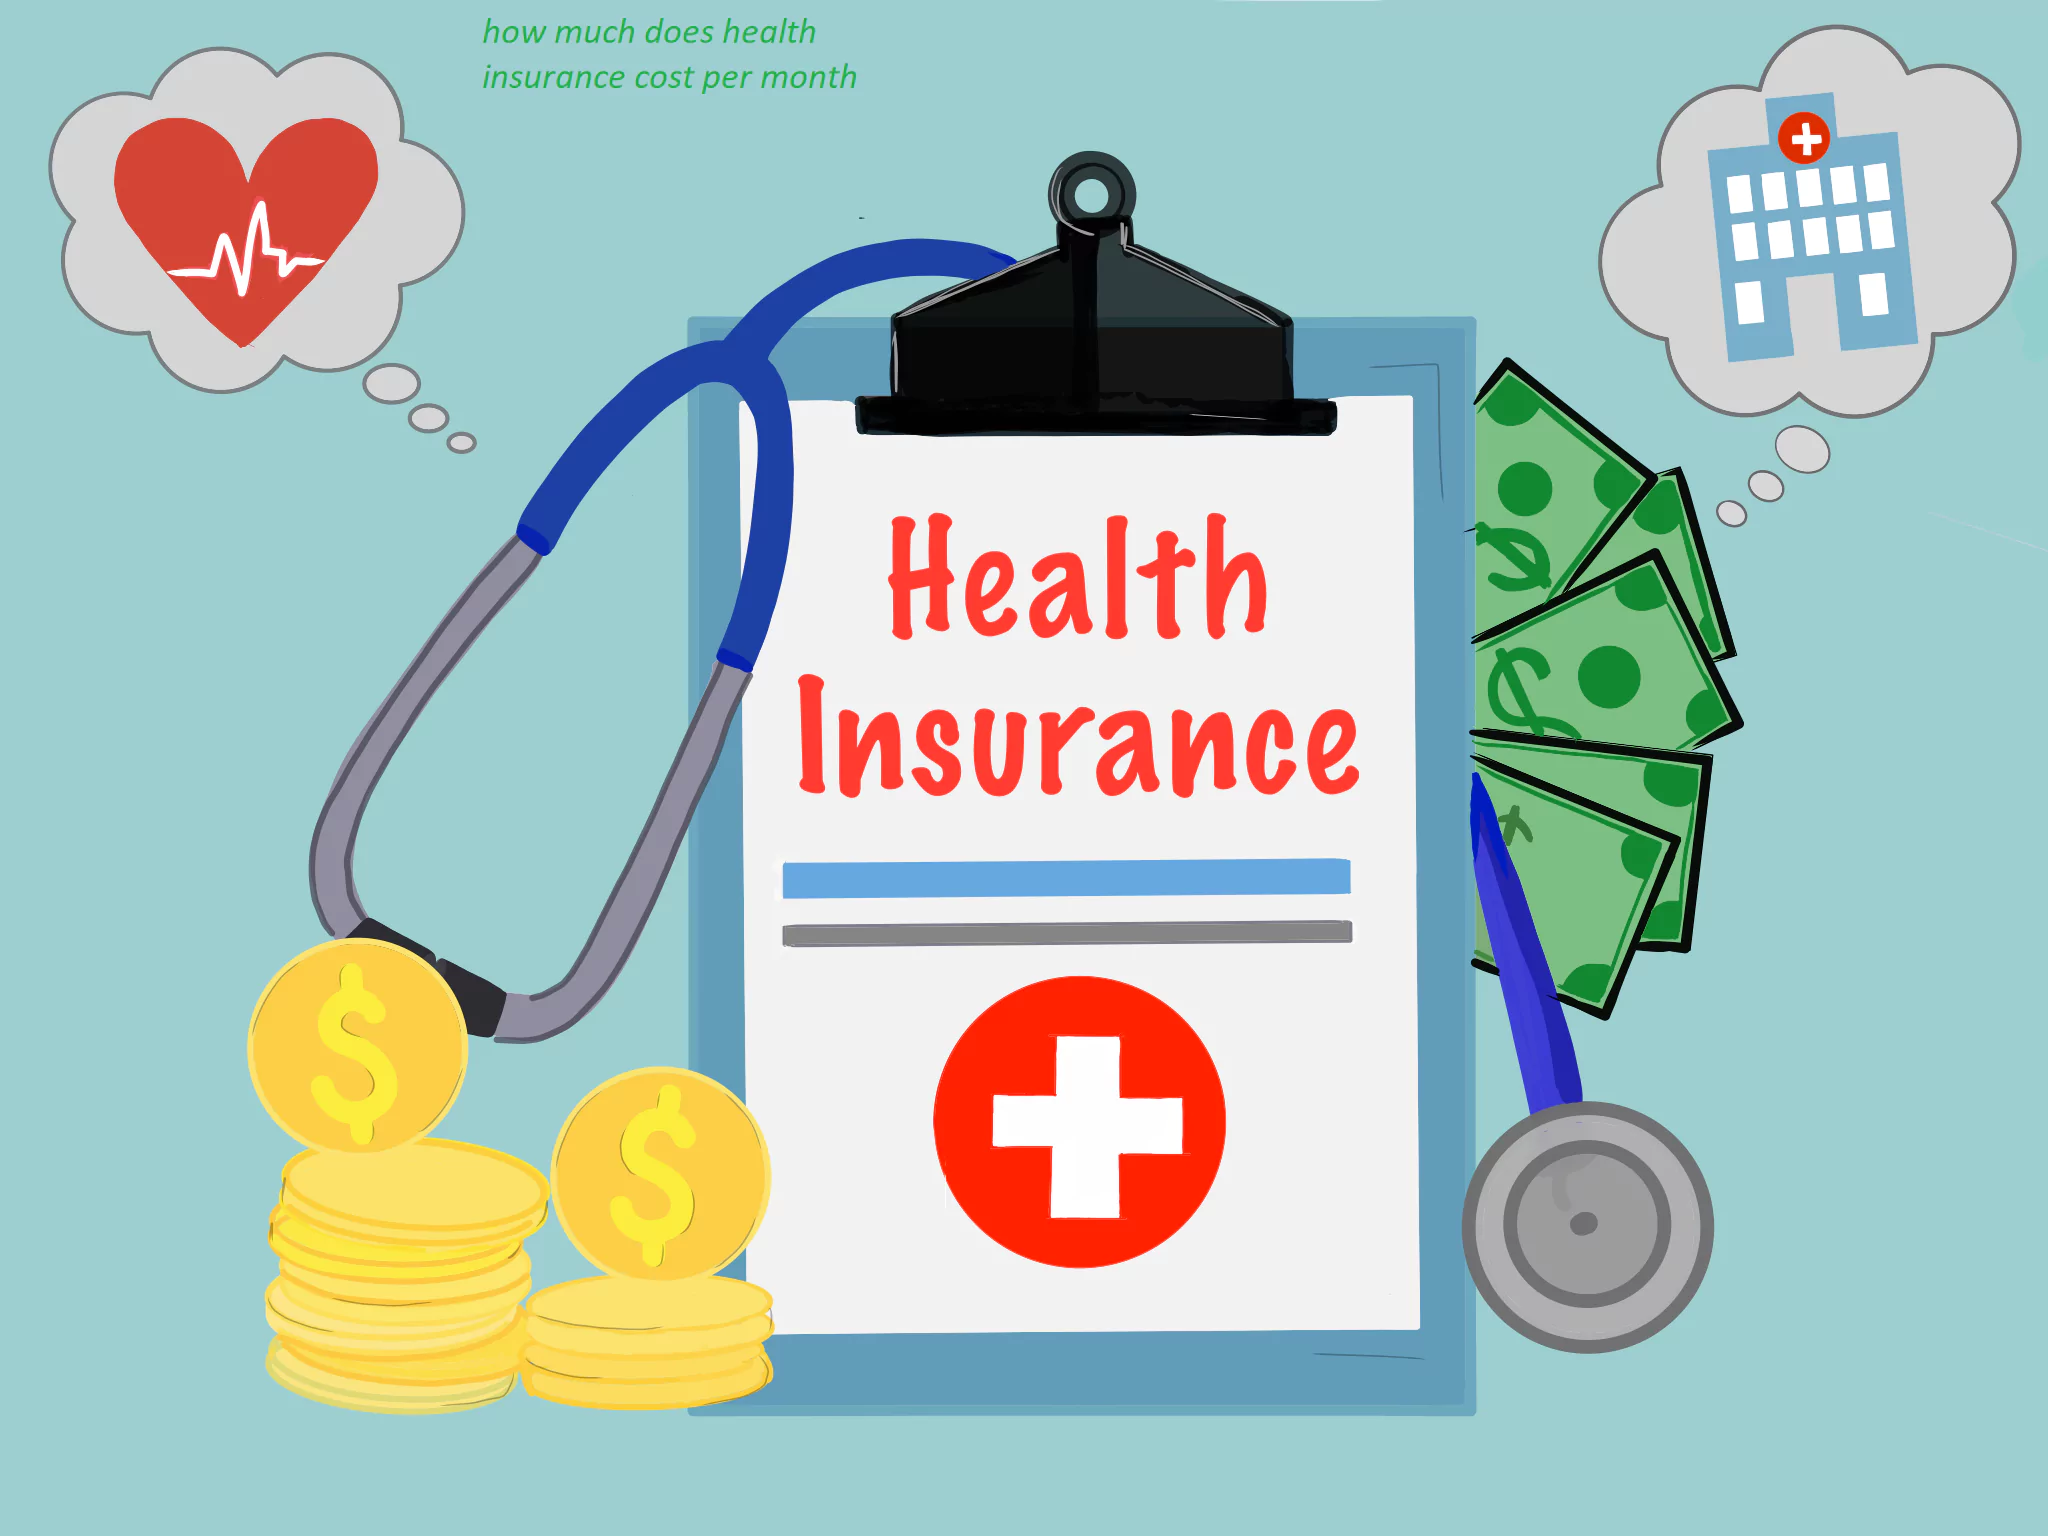 How much does health insurance cost per month